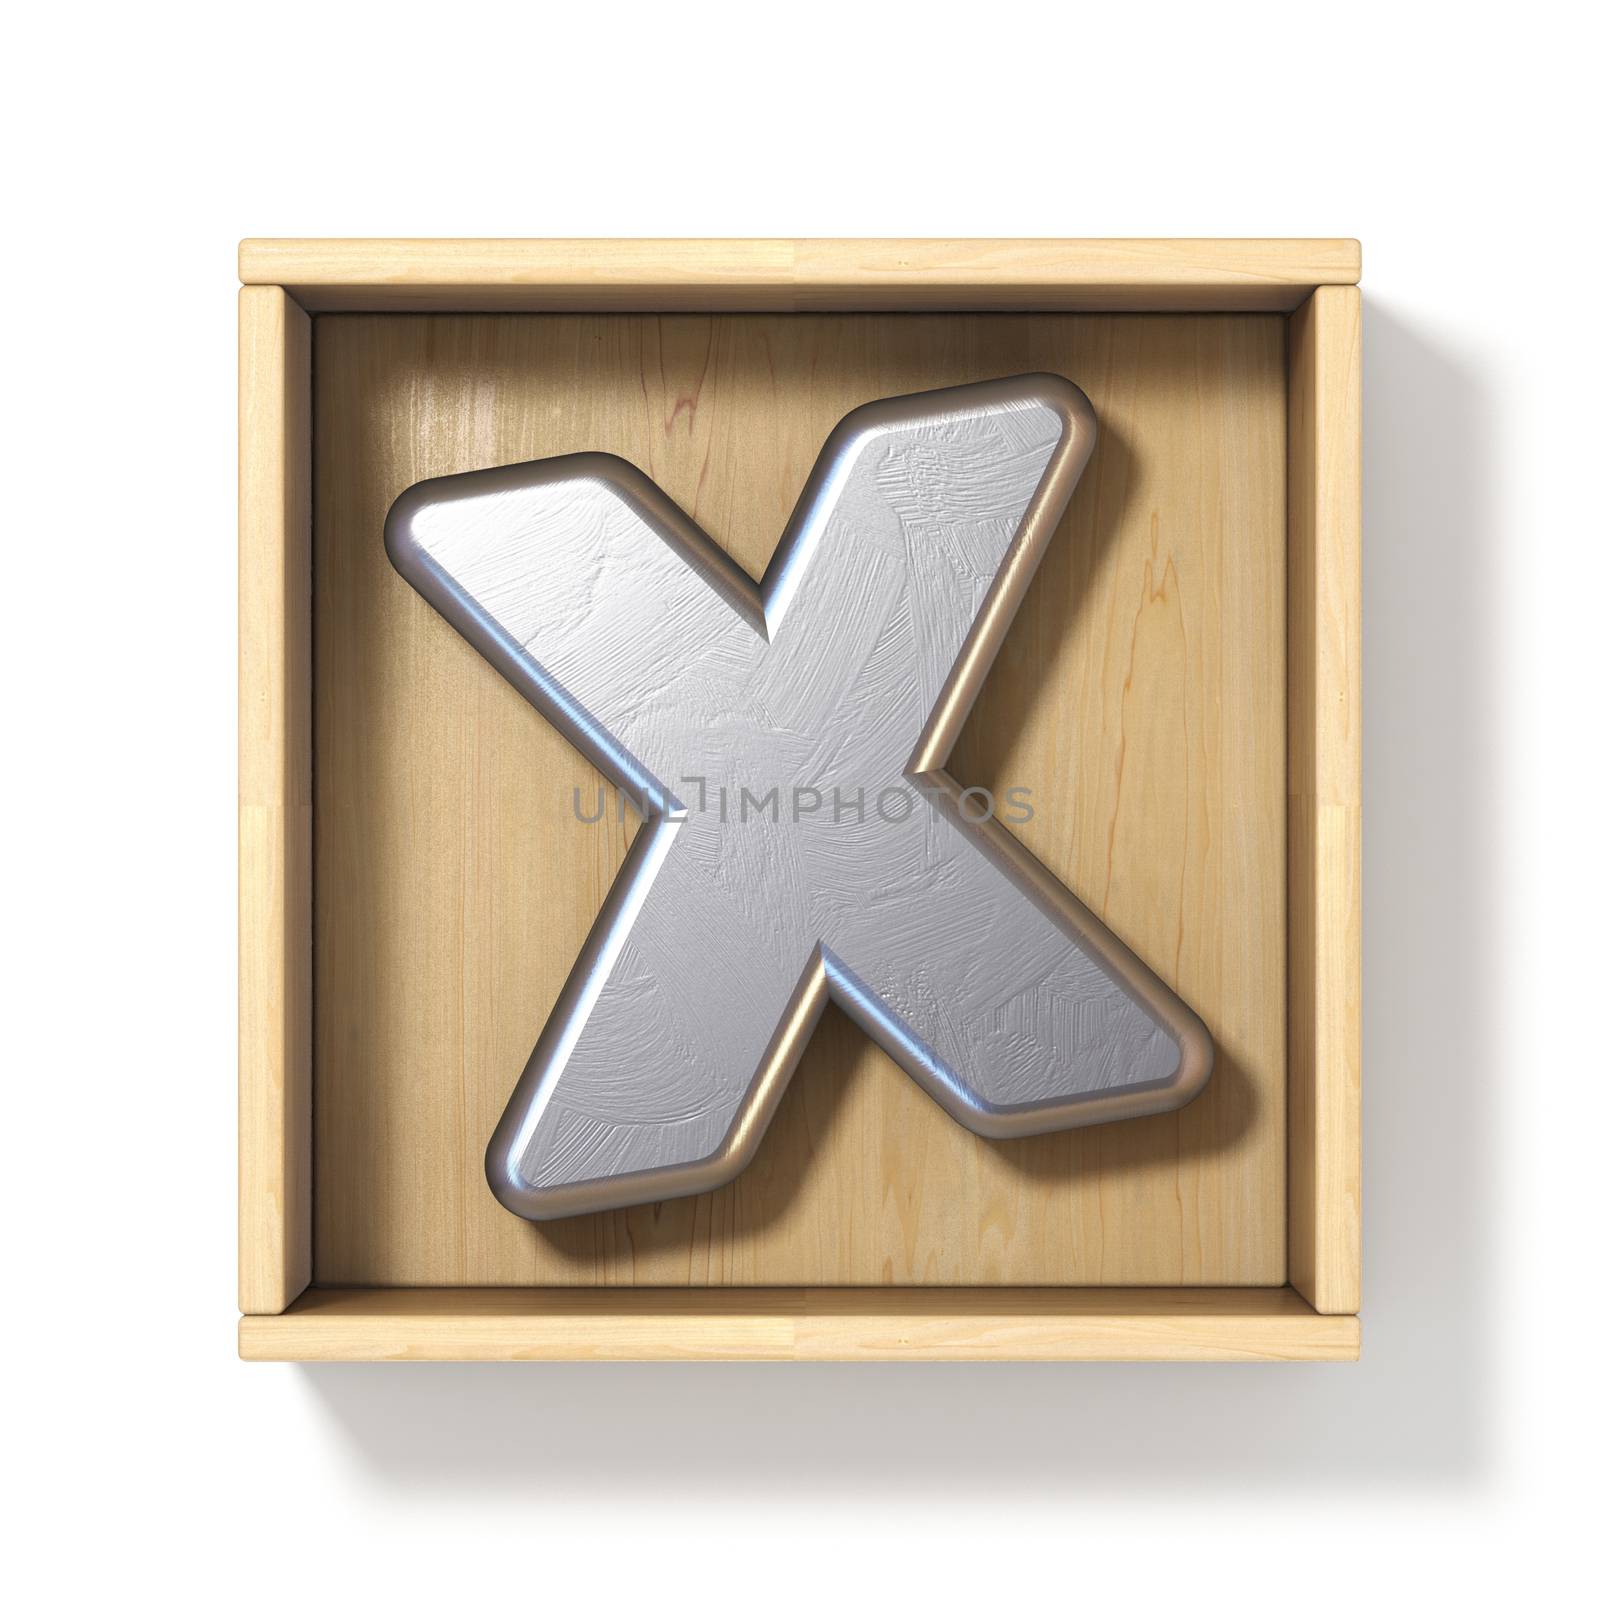 Silver metal letter X in wooden box 3D render illustration isolated on white background